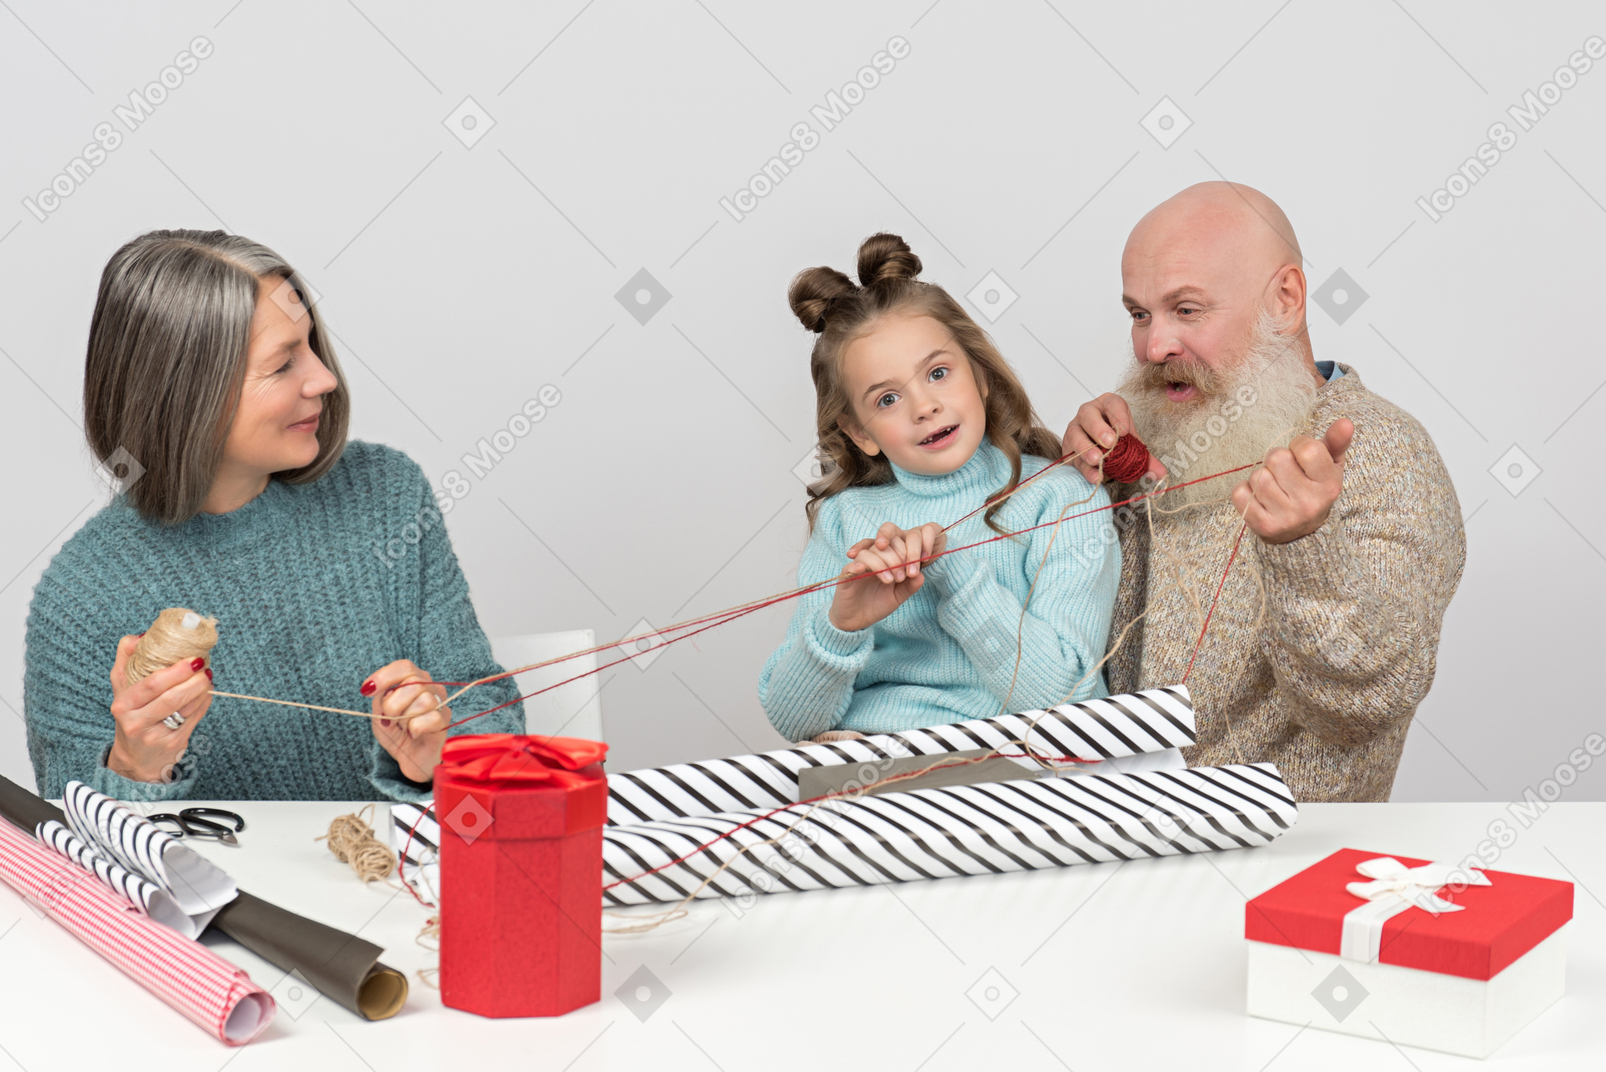 Grandparents and granddaughter holding threads while wrapping gifts